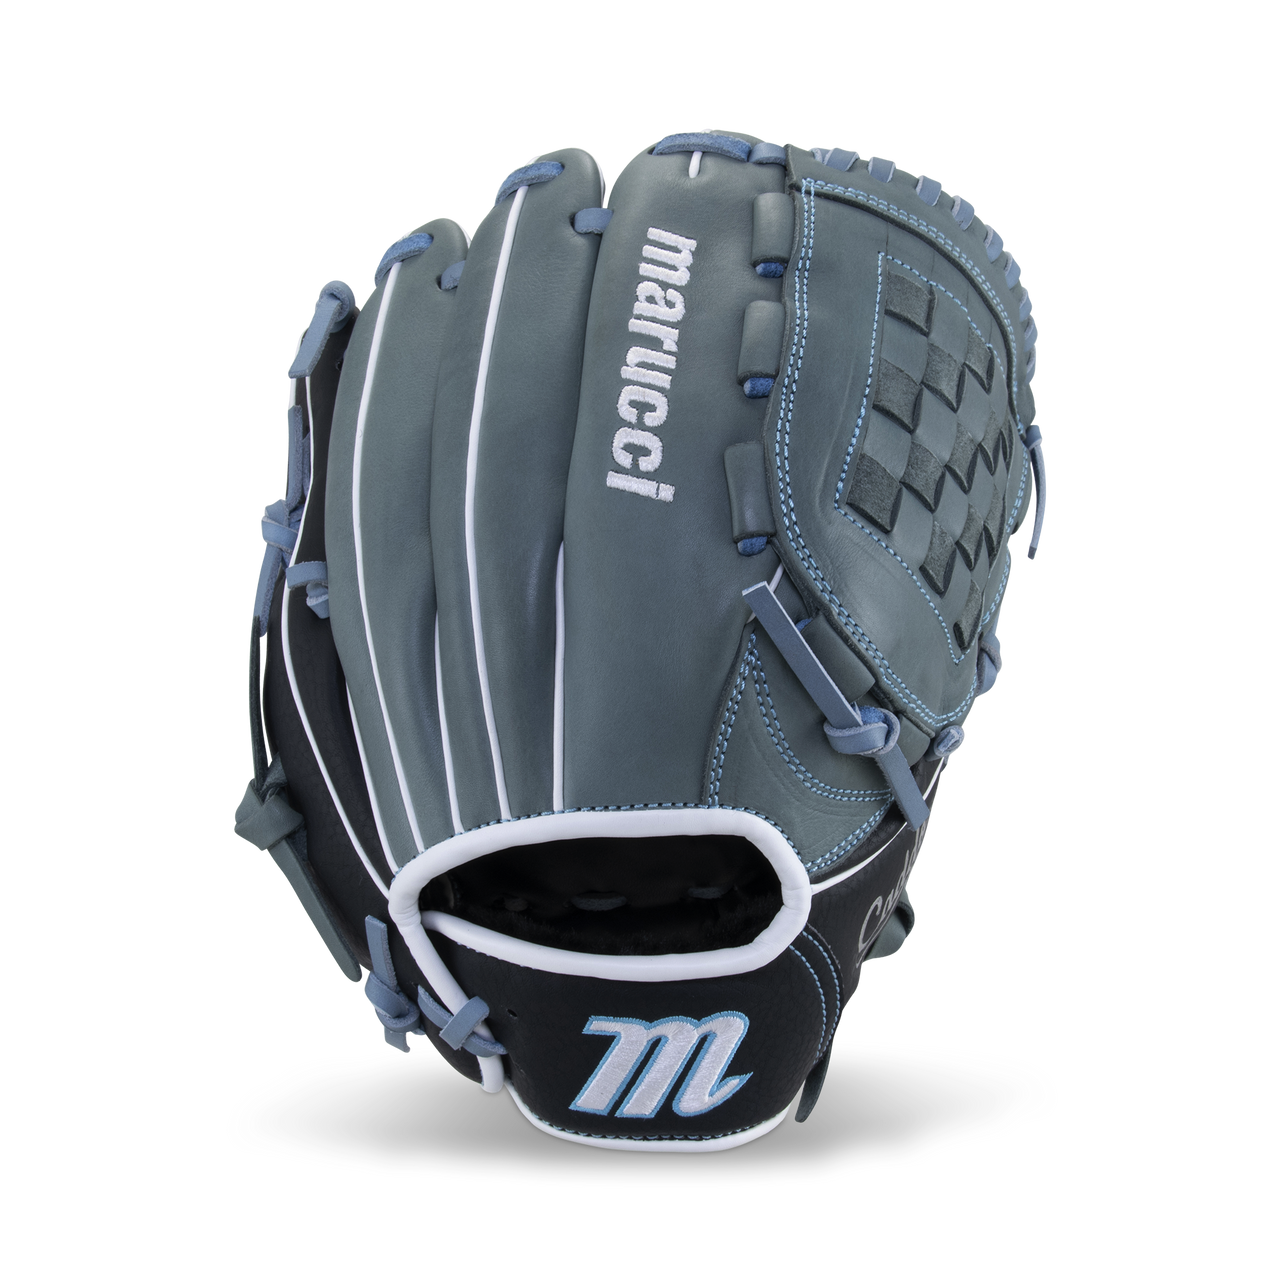 Marucci Caddo Fastpitch S Type 11.5" Basket Web Equipment MARUCCI Gray/Columbia Blue Right Hand Throw 